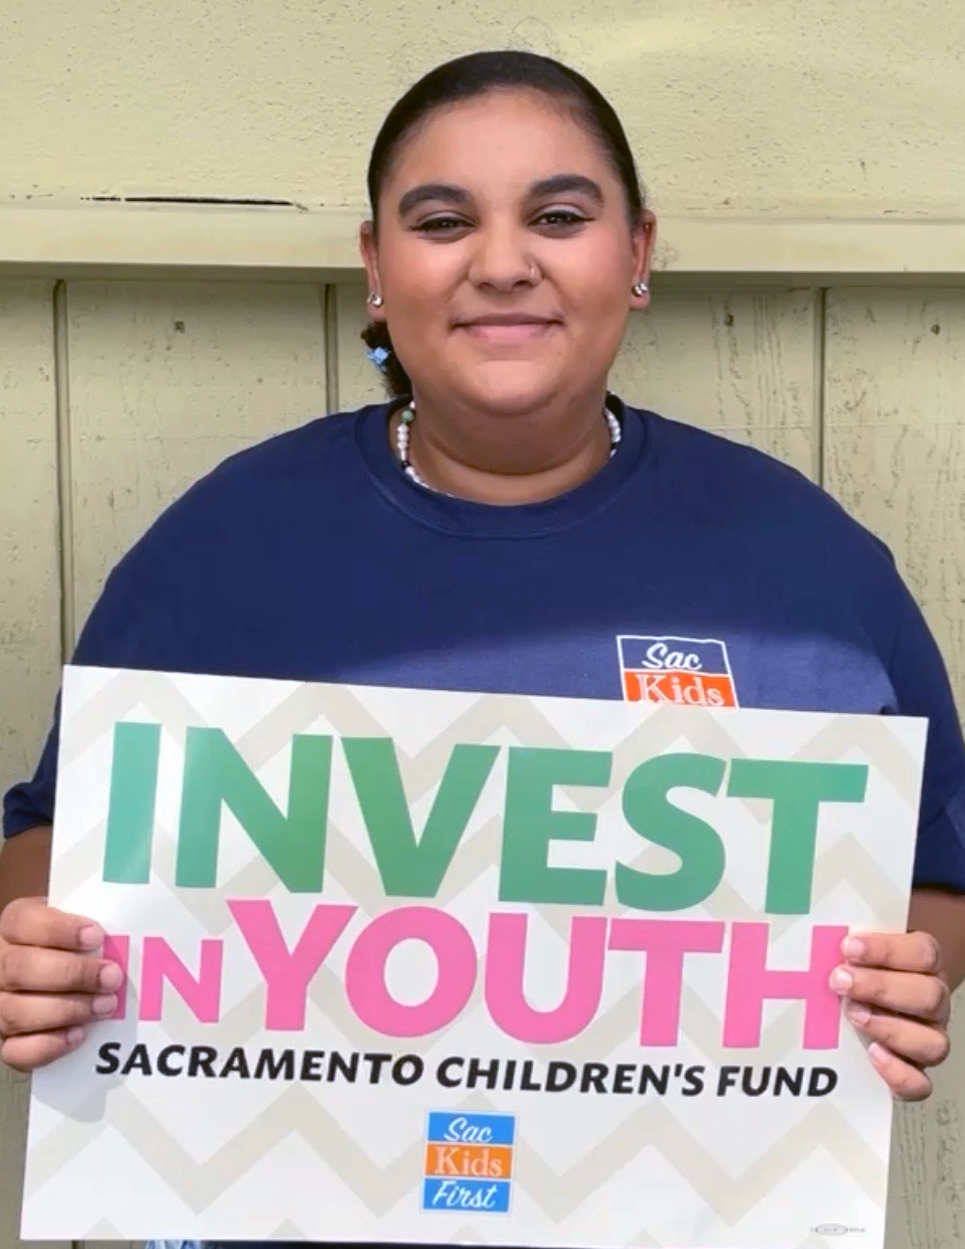 Kennedy McIntyre holding an "Invest in Youth" poster